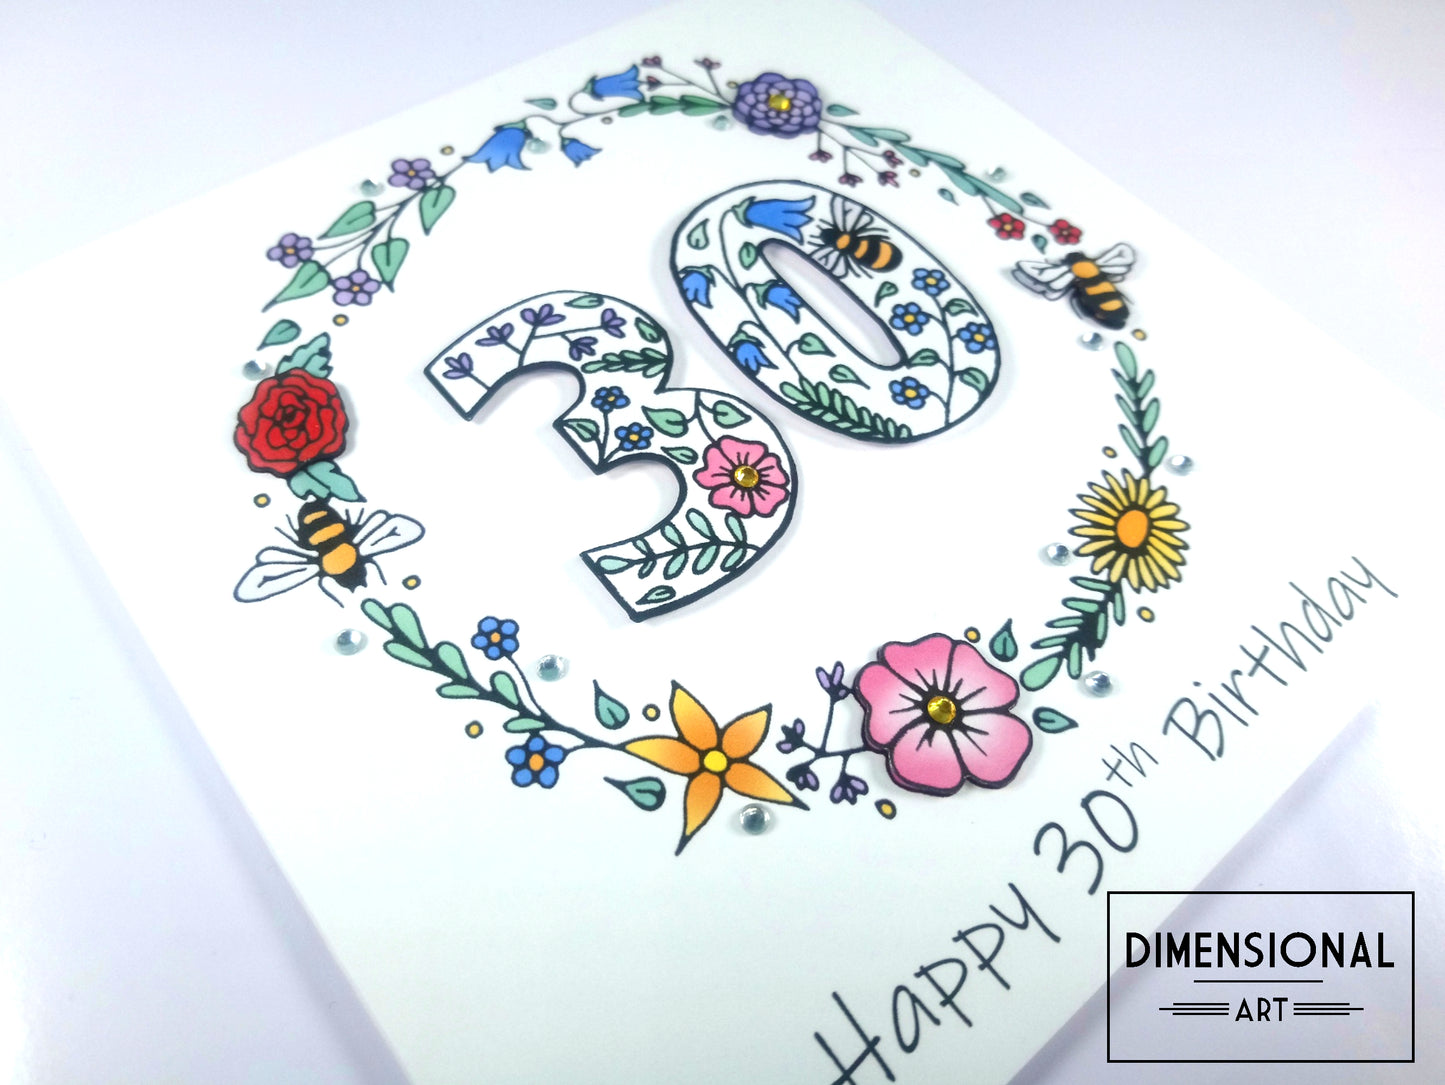 30th Flowers and Bees Birthday Card